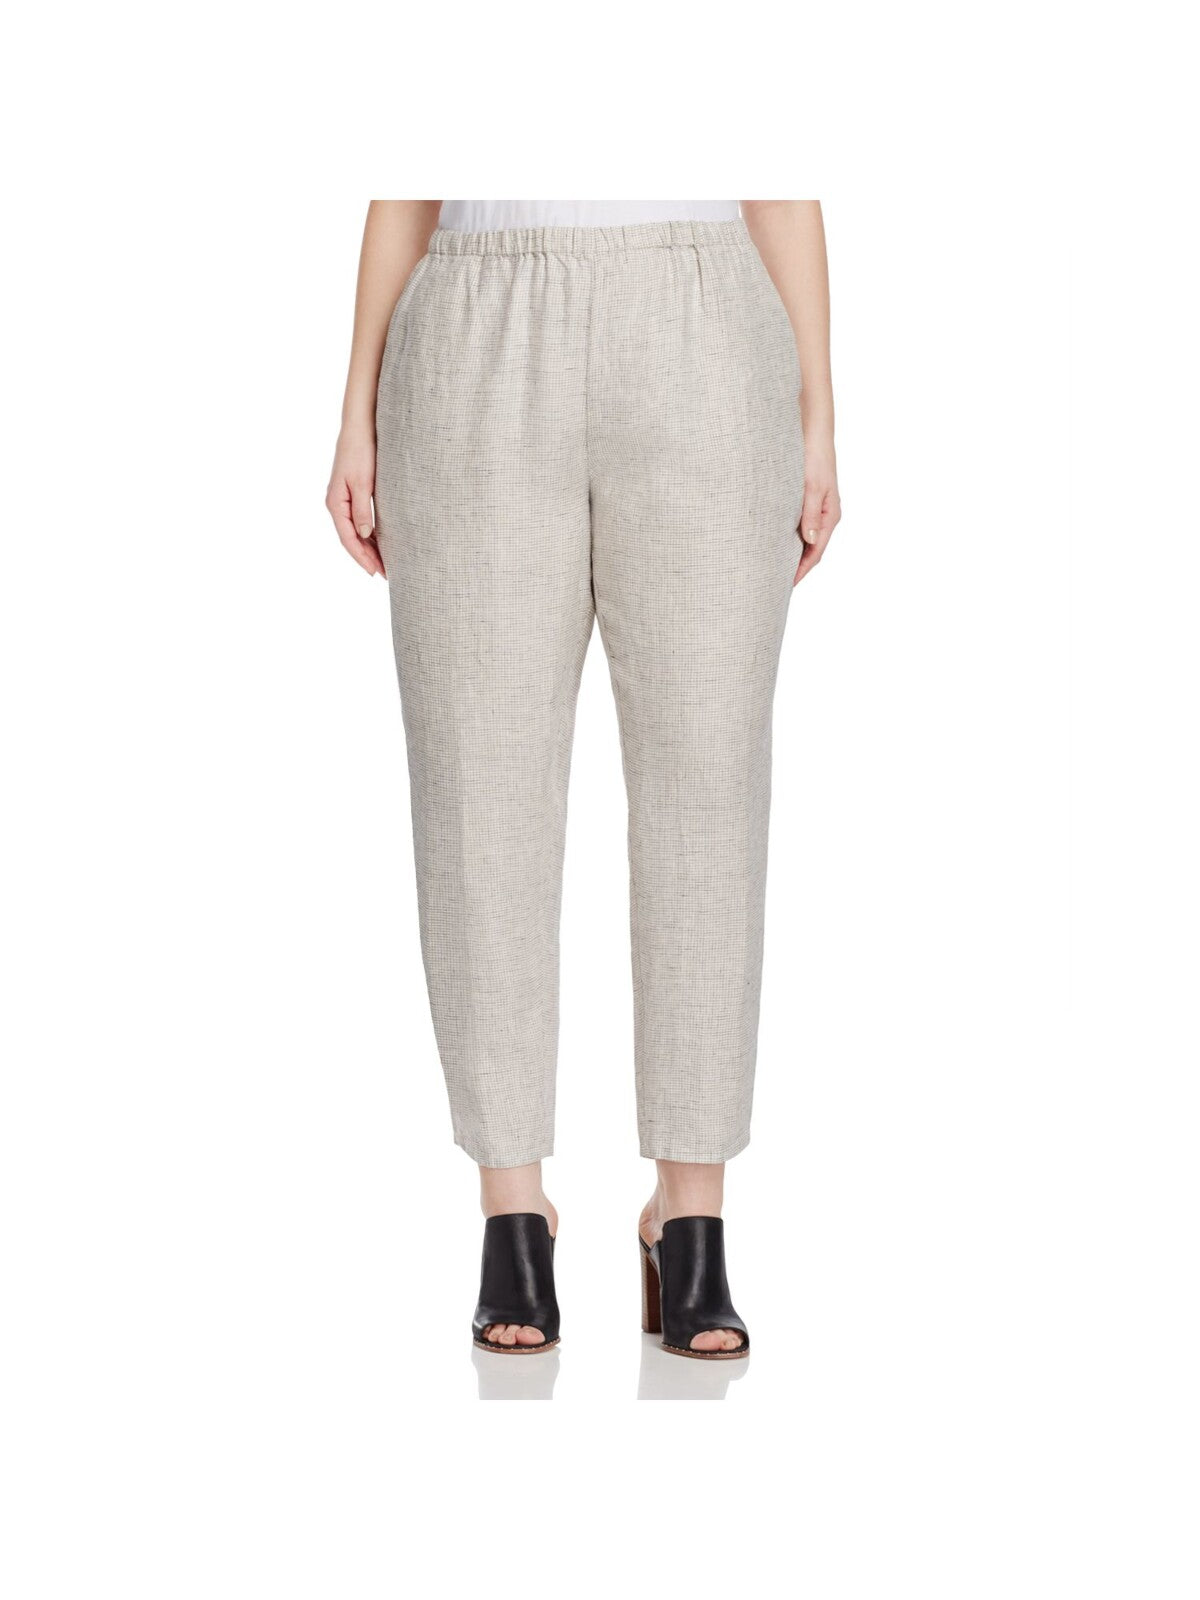 EILEEN FISHER Womens Ivory Check Pants Plus 1X